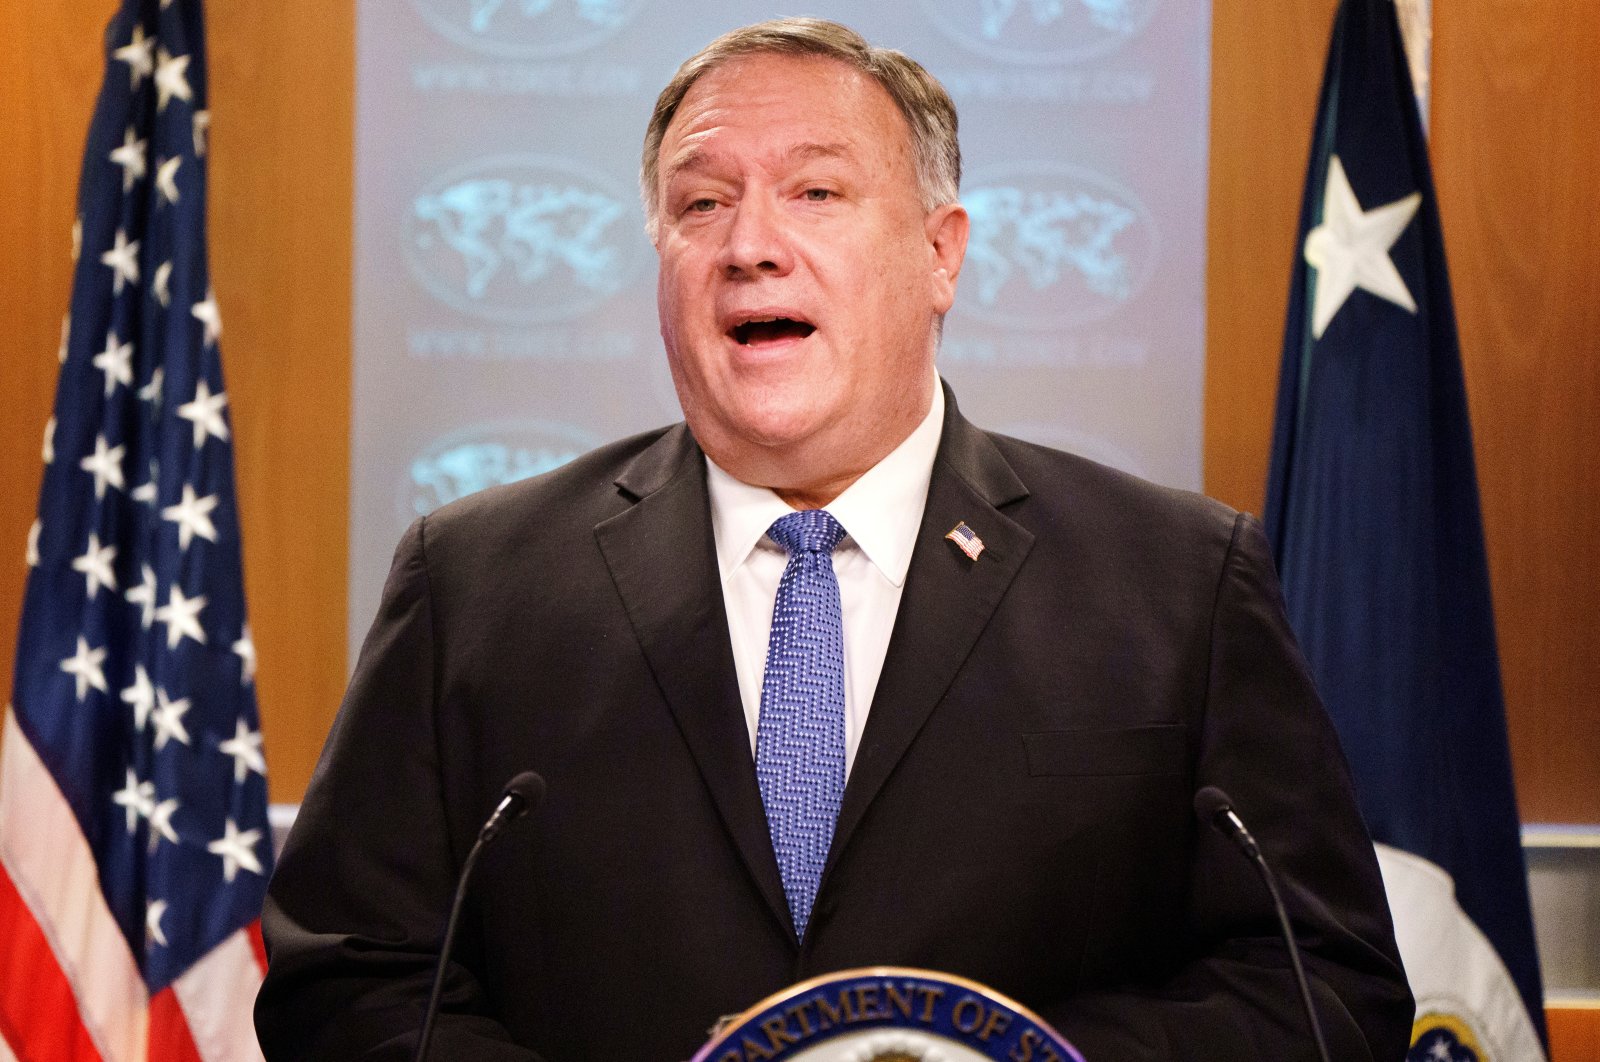 U.S. Secretary of State Mike Pompeo speaks during a briefing to the media at the State Department in Washington, D.C., U.S., Nov. 10, 2020. (Reuters Photo)